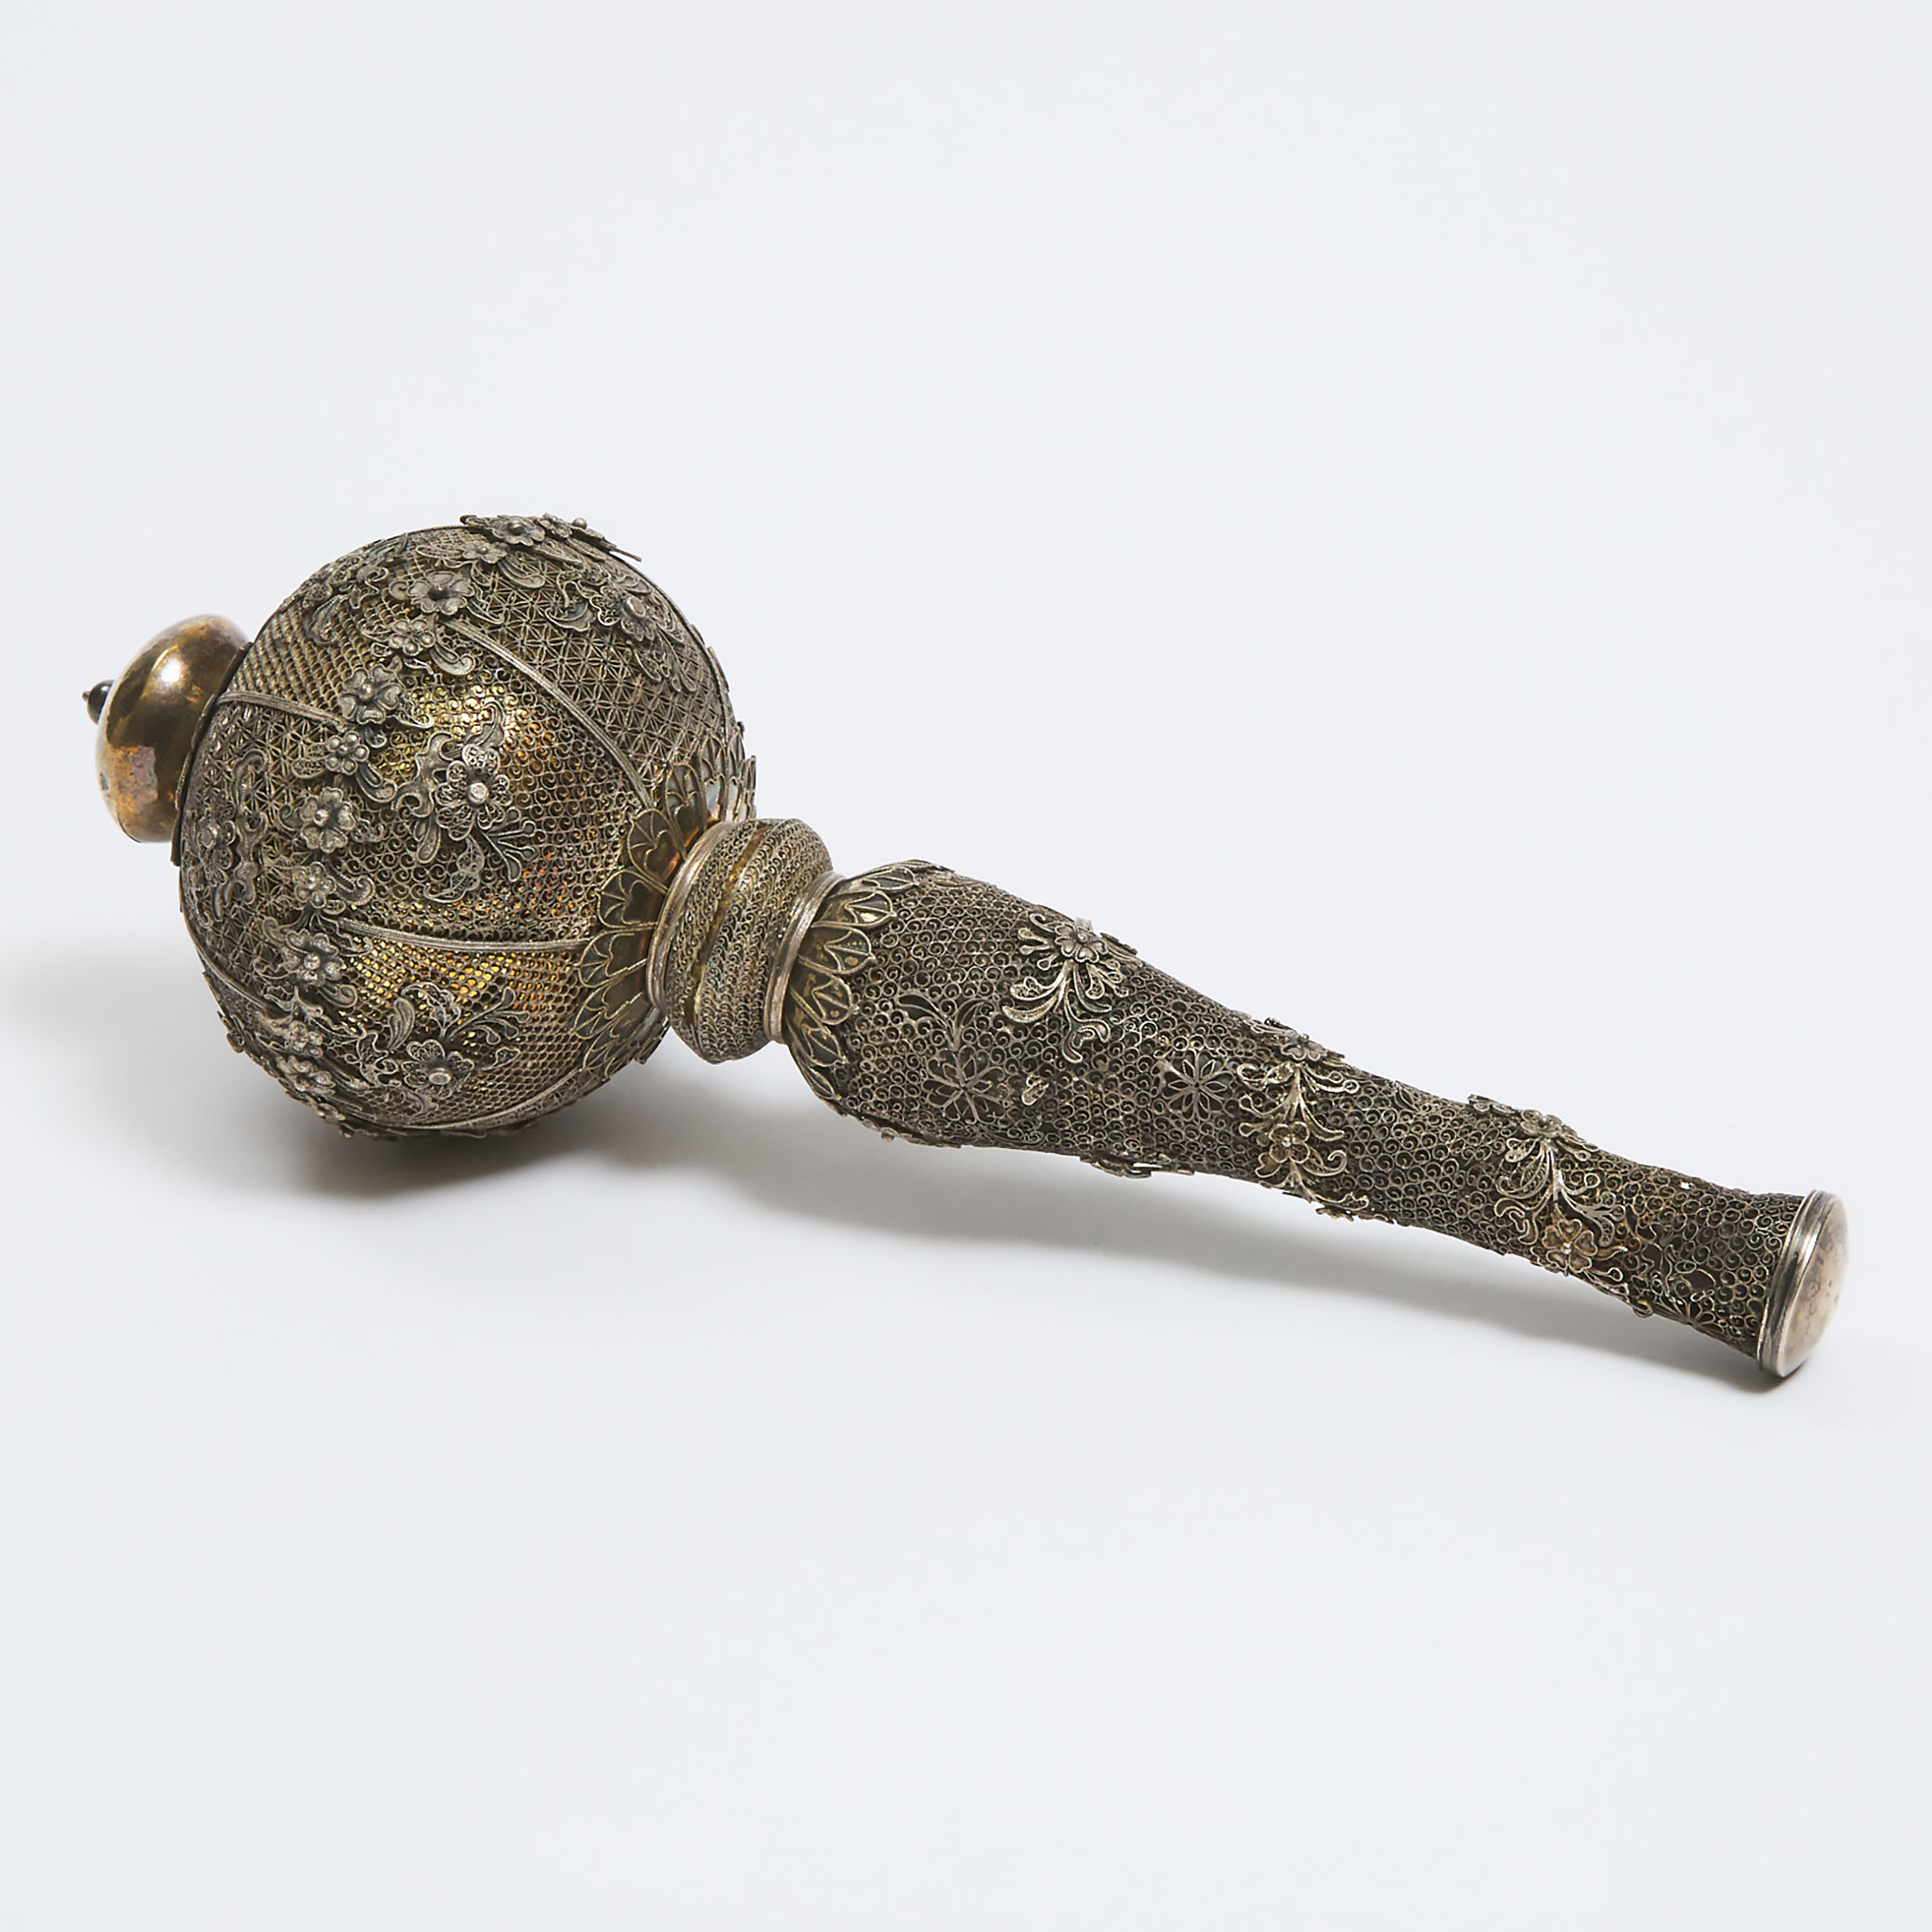 A Silver and Brass Filigree Children's Toy, Late 19th Century